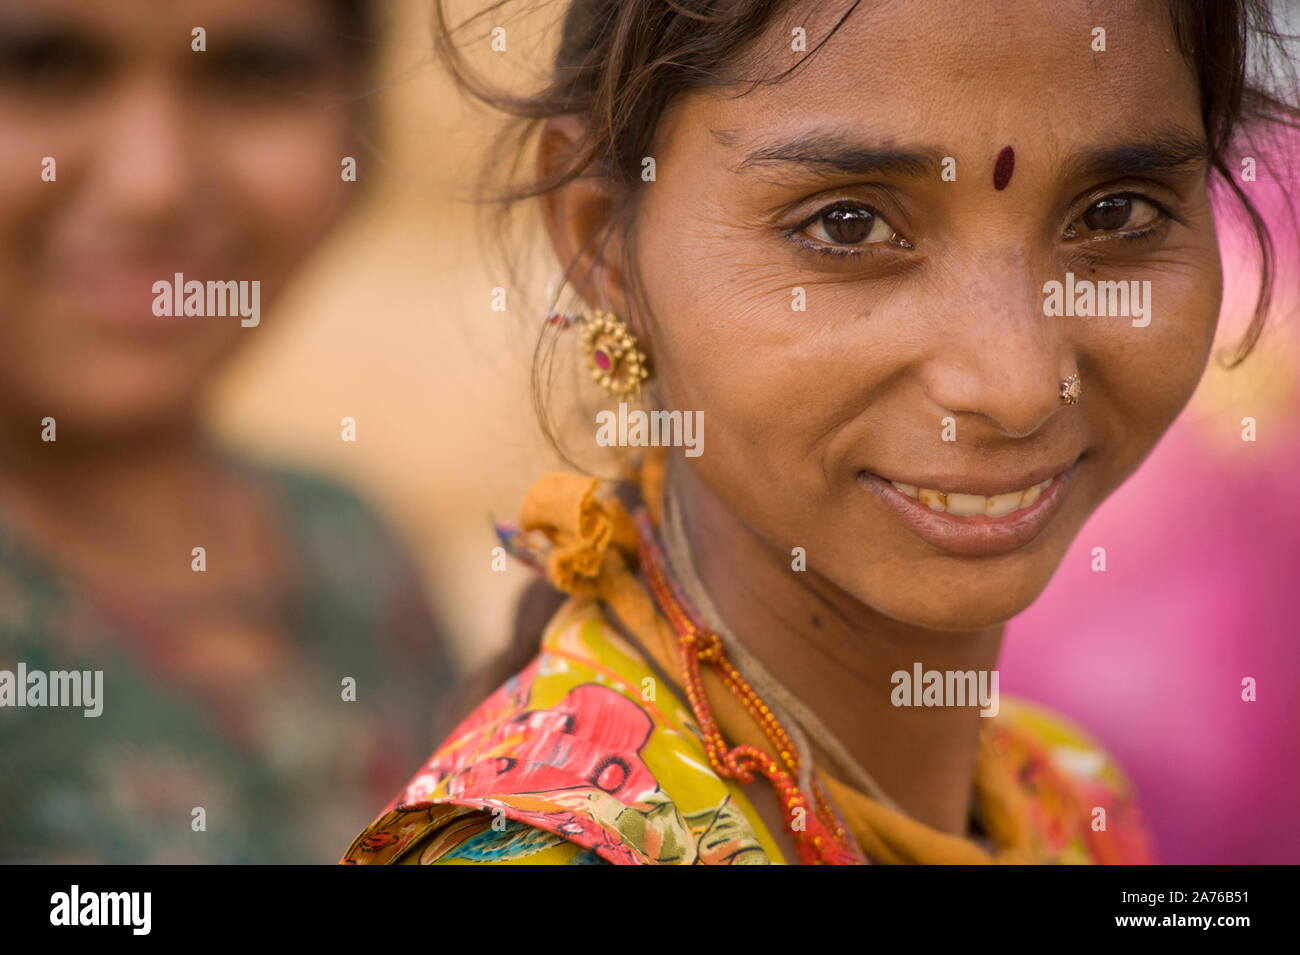 Jaisalmer, Rajasthan, India - August 17, 2011 - Smiling Indian woman from Rajasthan Stock Photo